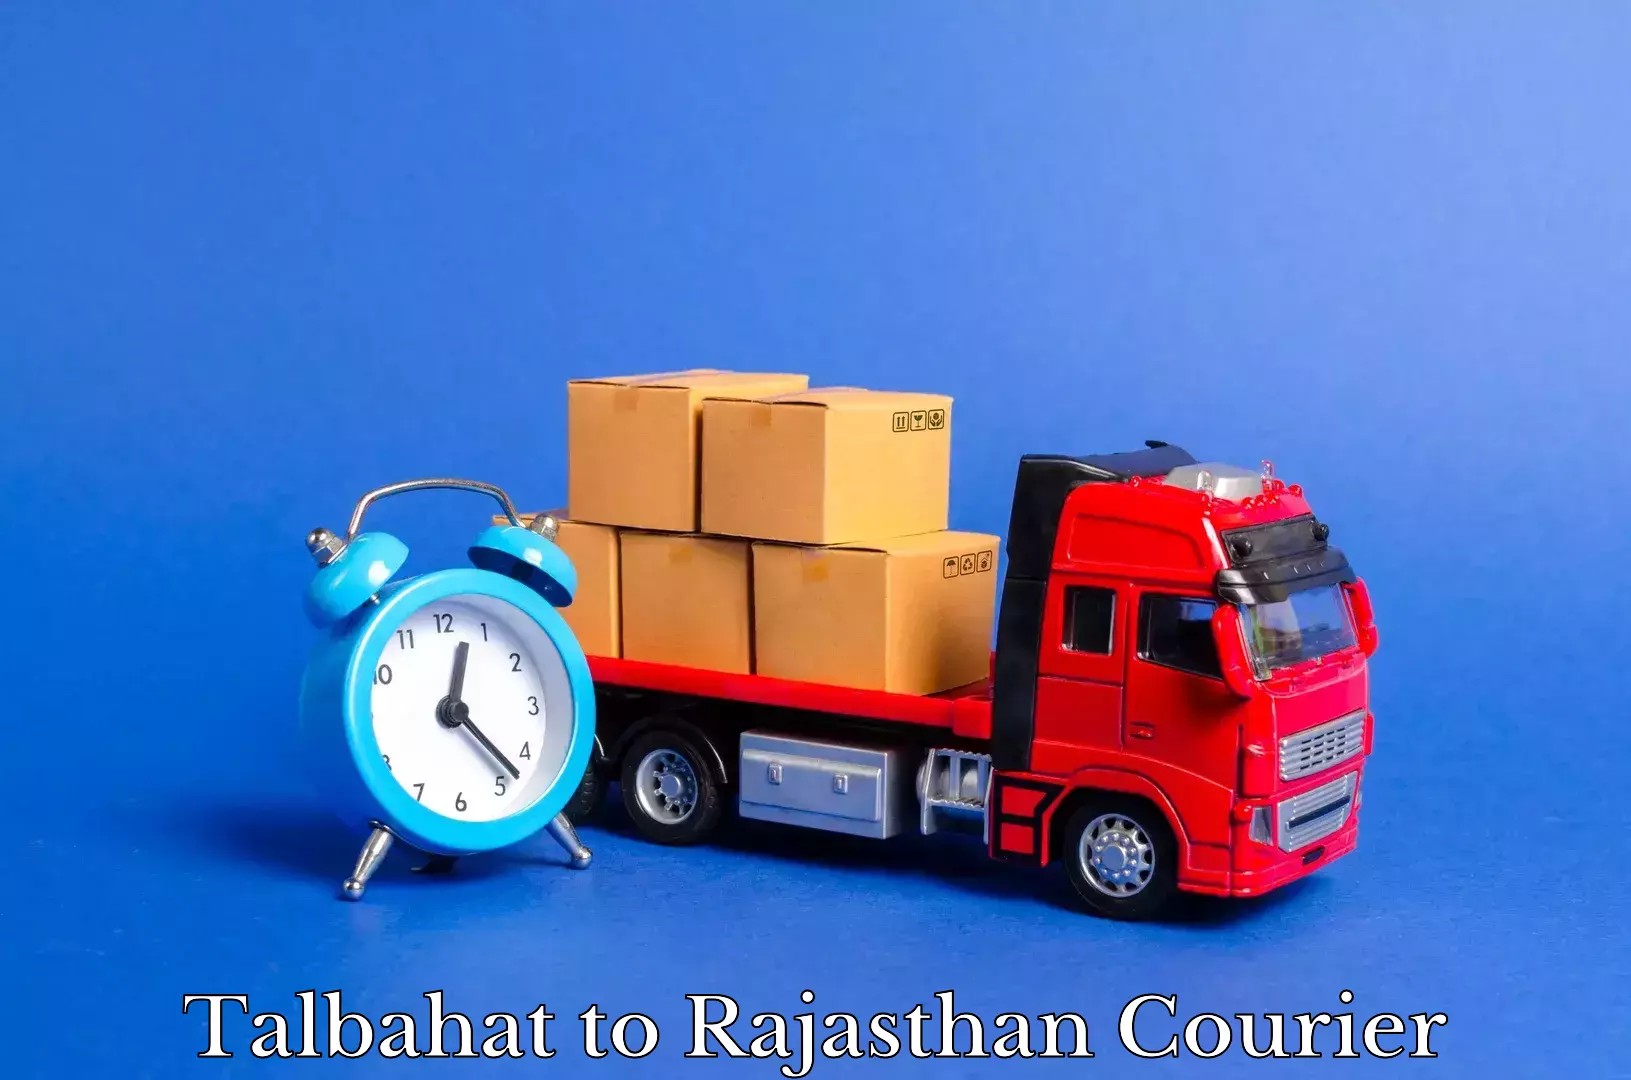 Furniture moving specialists Talbahat to Rajasthan